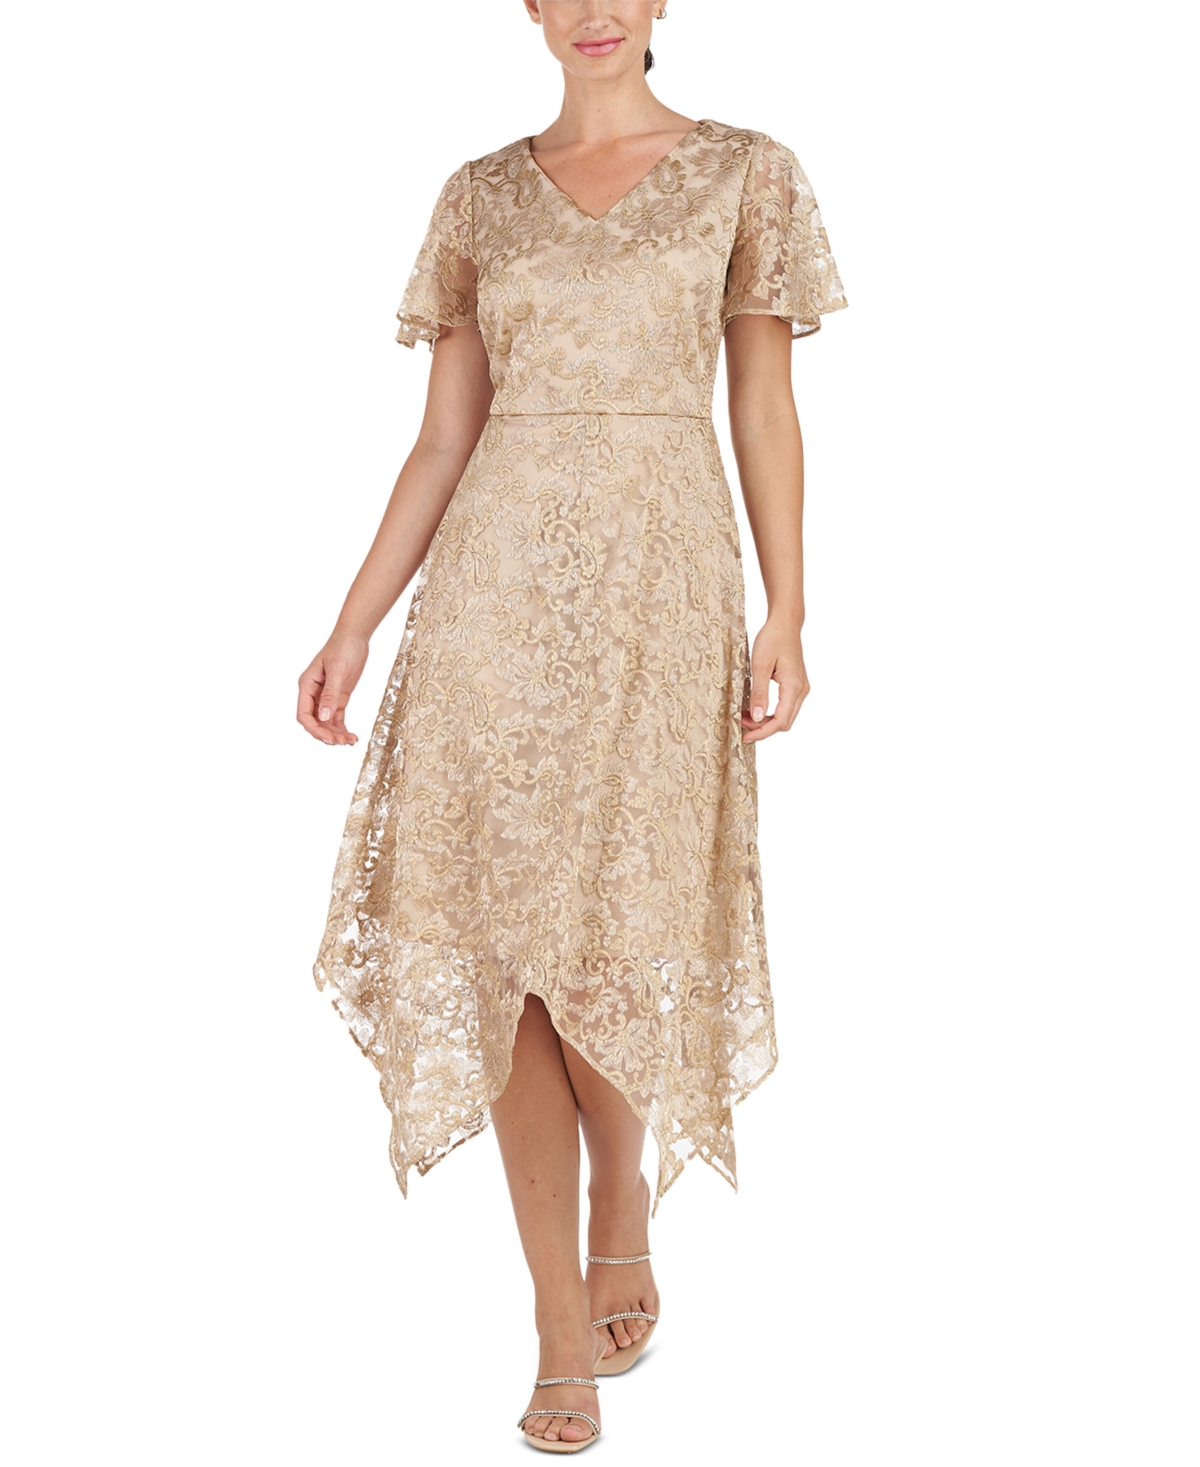 Buy Boardwalk Empire Inspired Dresses Js Collections Womens Emerson Embroidered Dress - Gold $123.99 AT vintagedancer.com